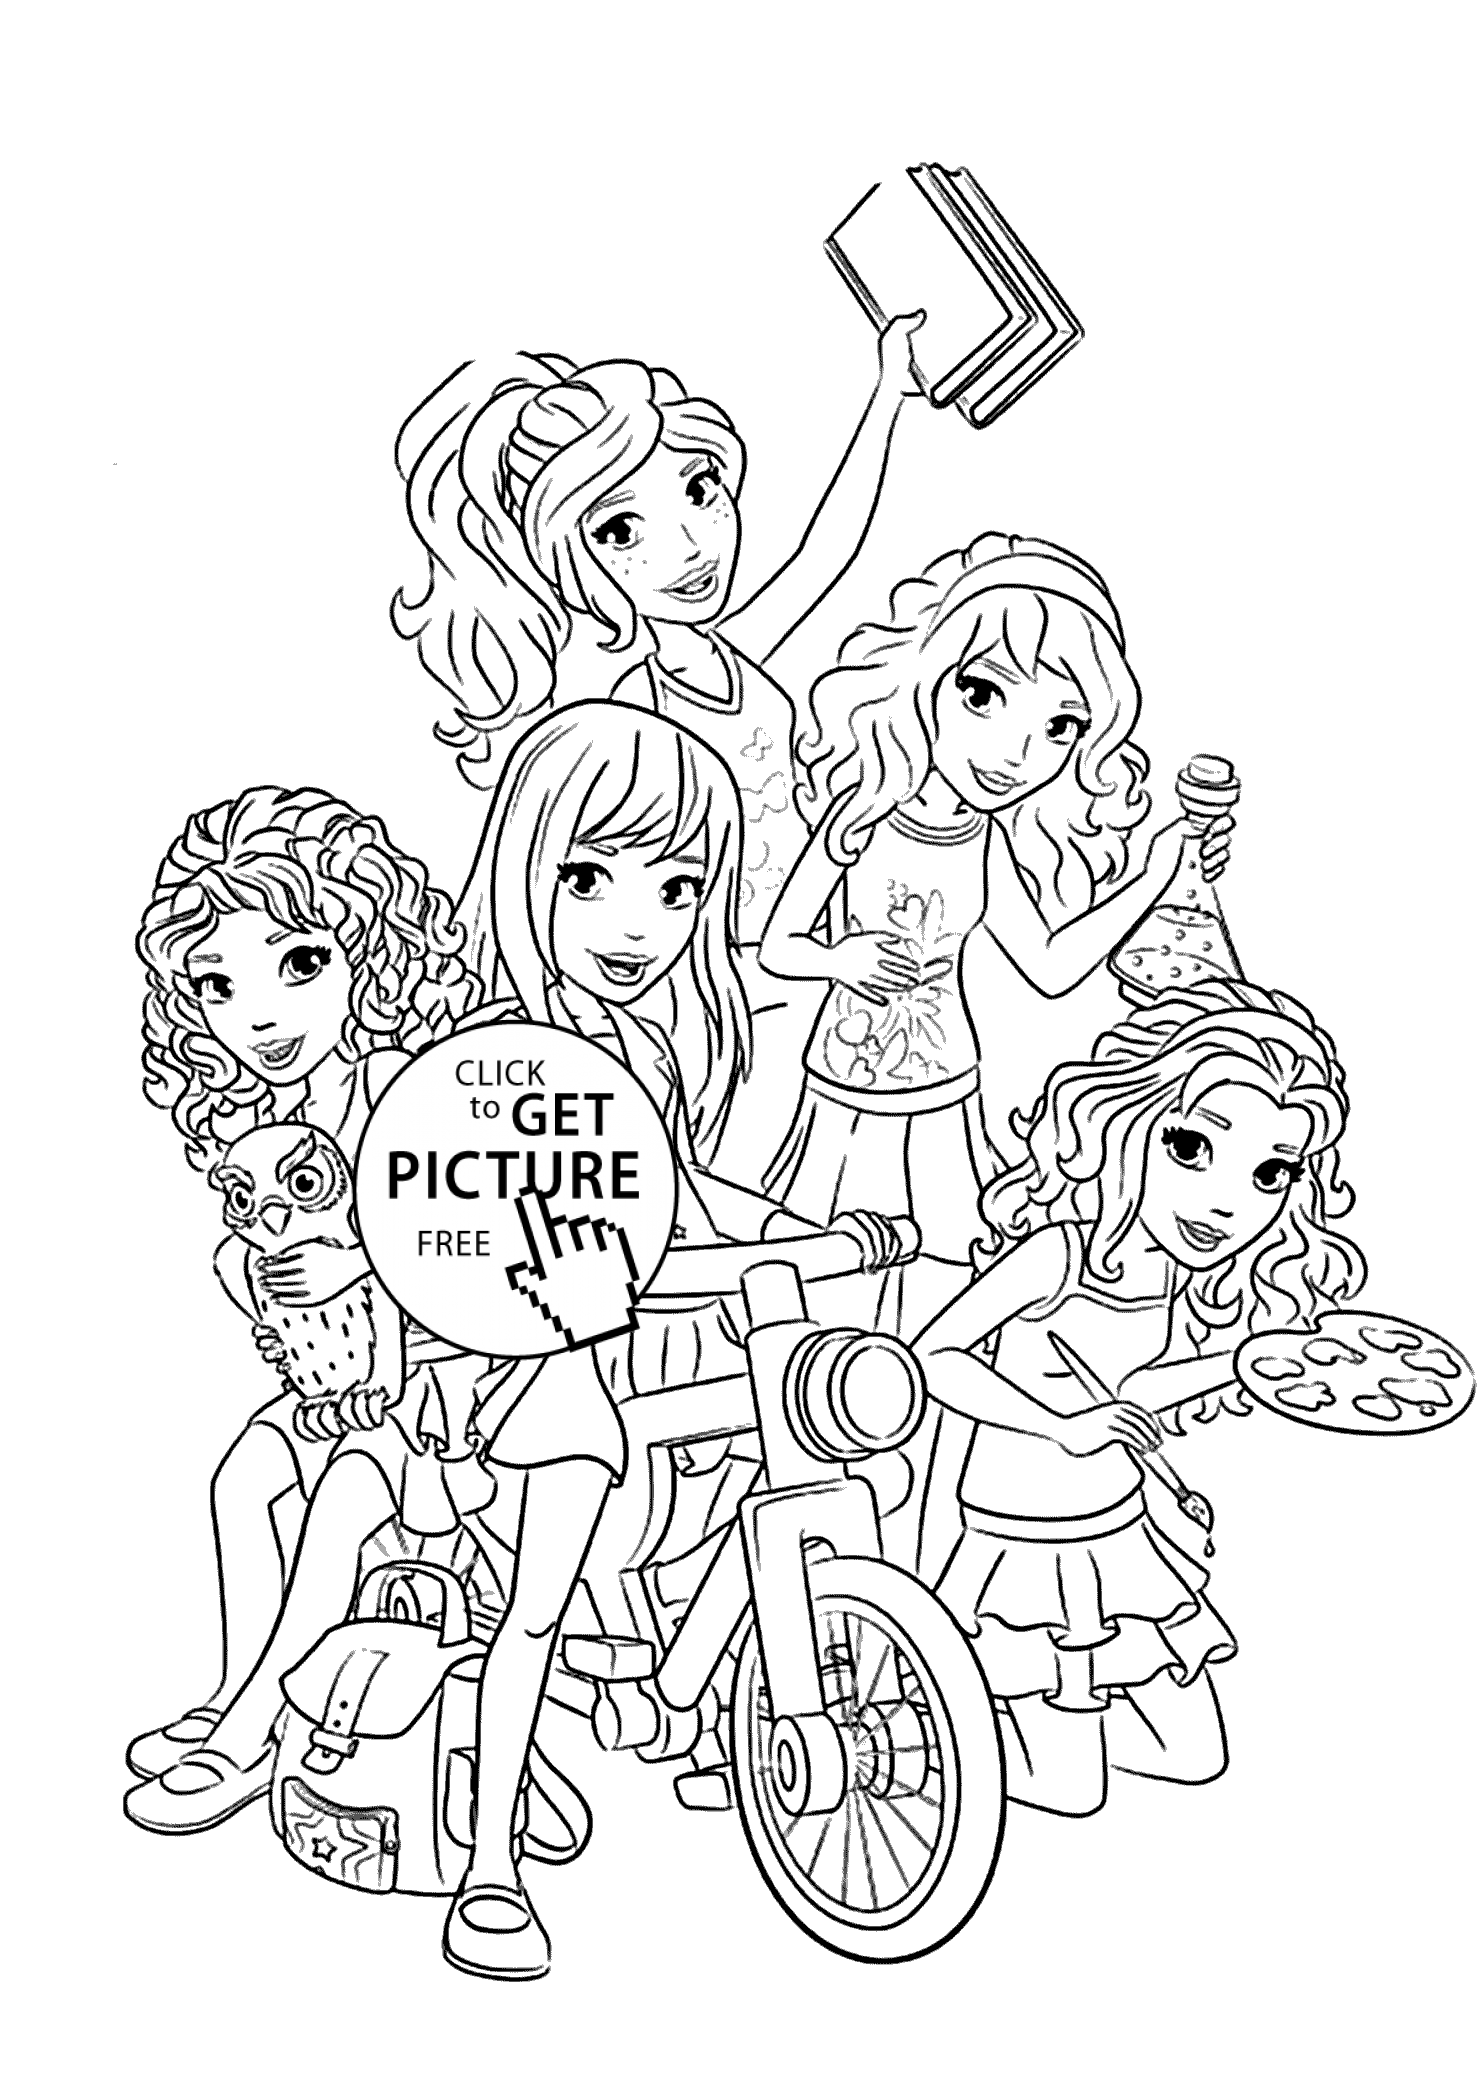 lego friends coloring pages lego friends coloring pages getcoloringpagescom lego coloring friends pages 